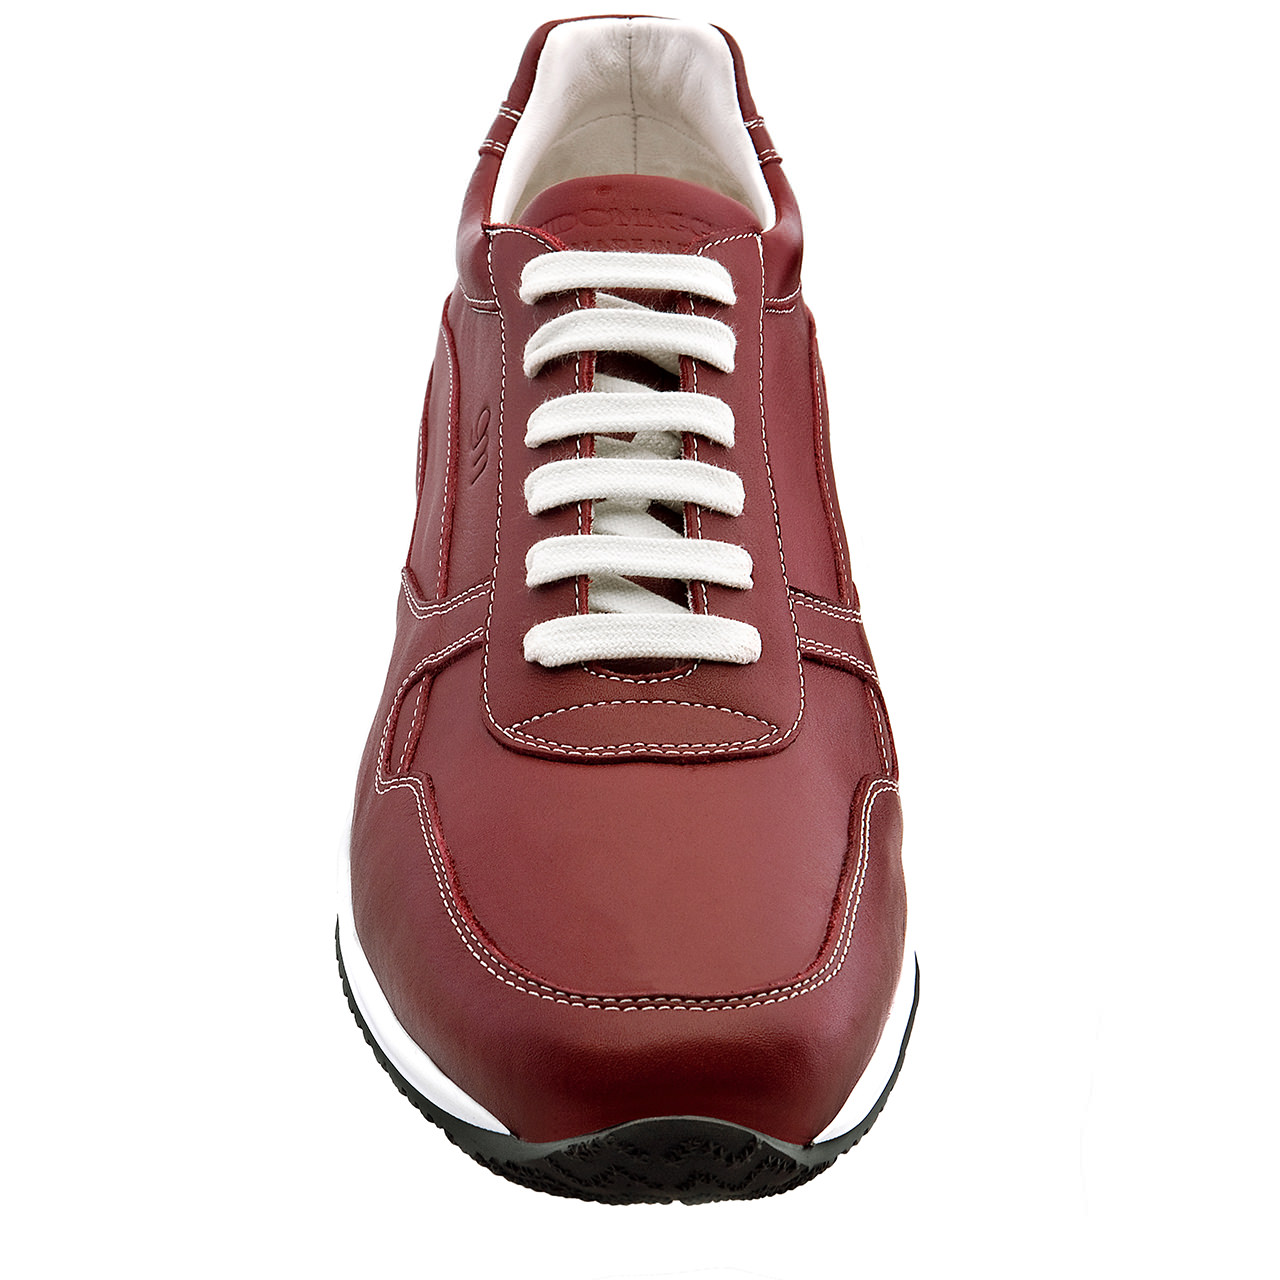 Elevator sneakers Amsterdam - Guidomaggi shoes for women